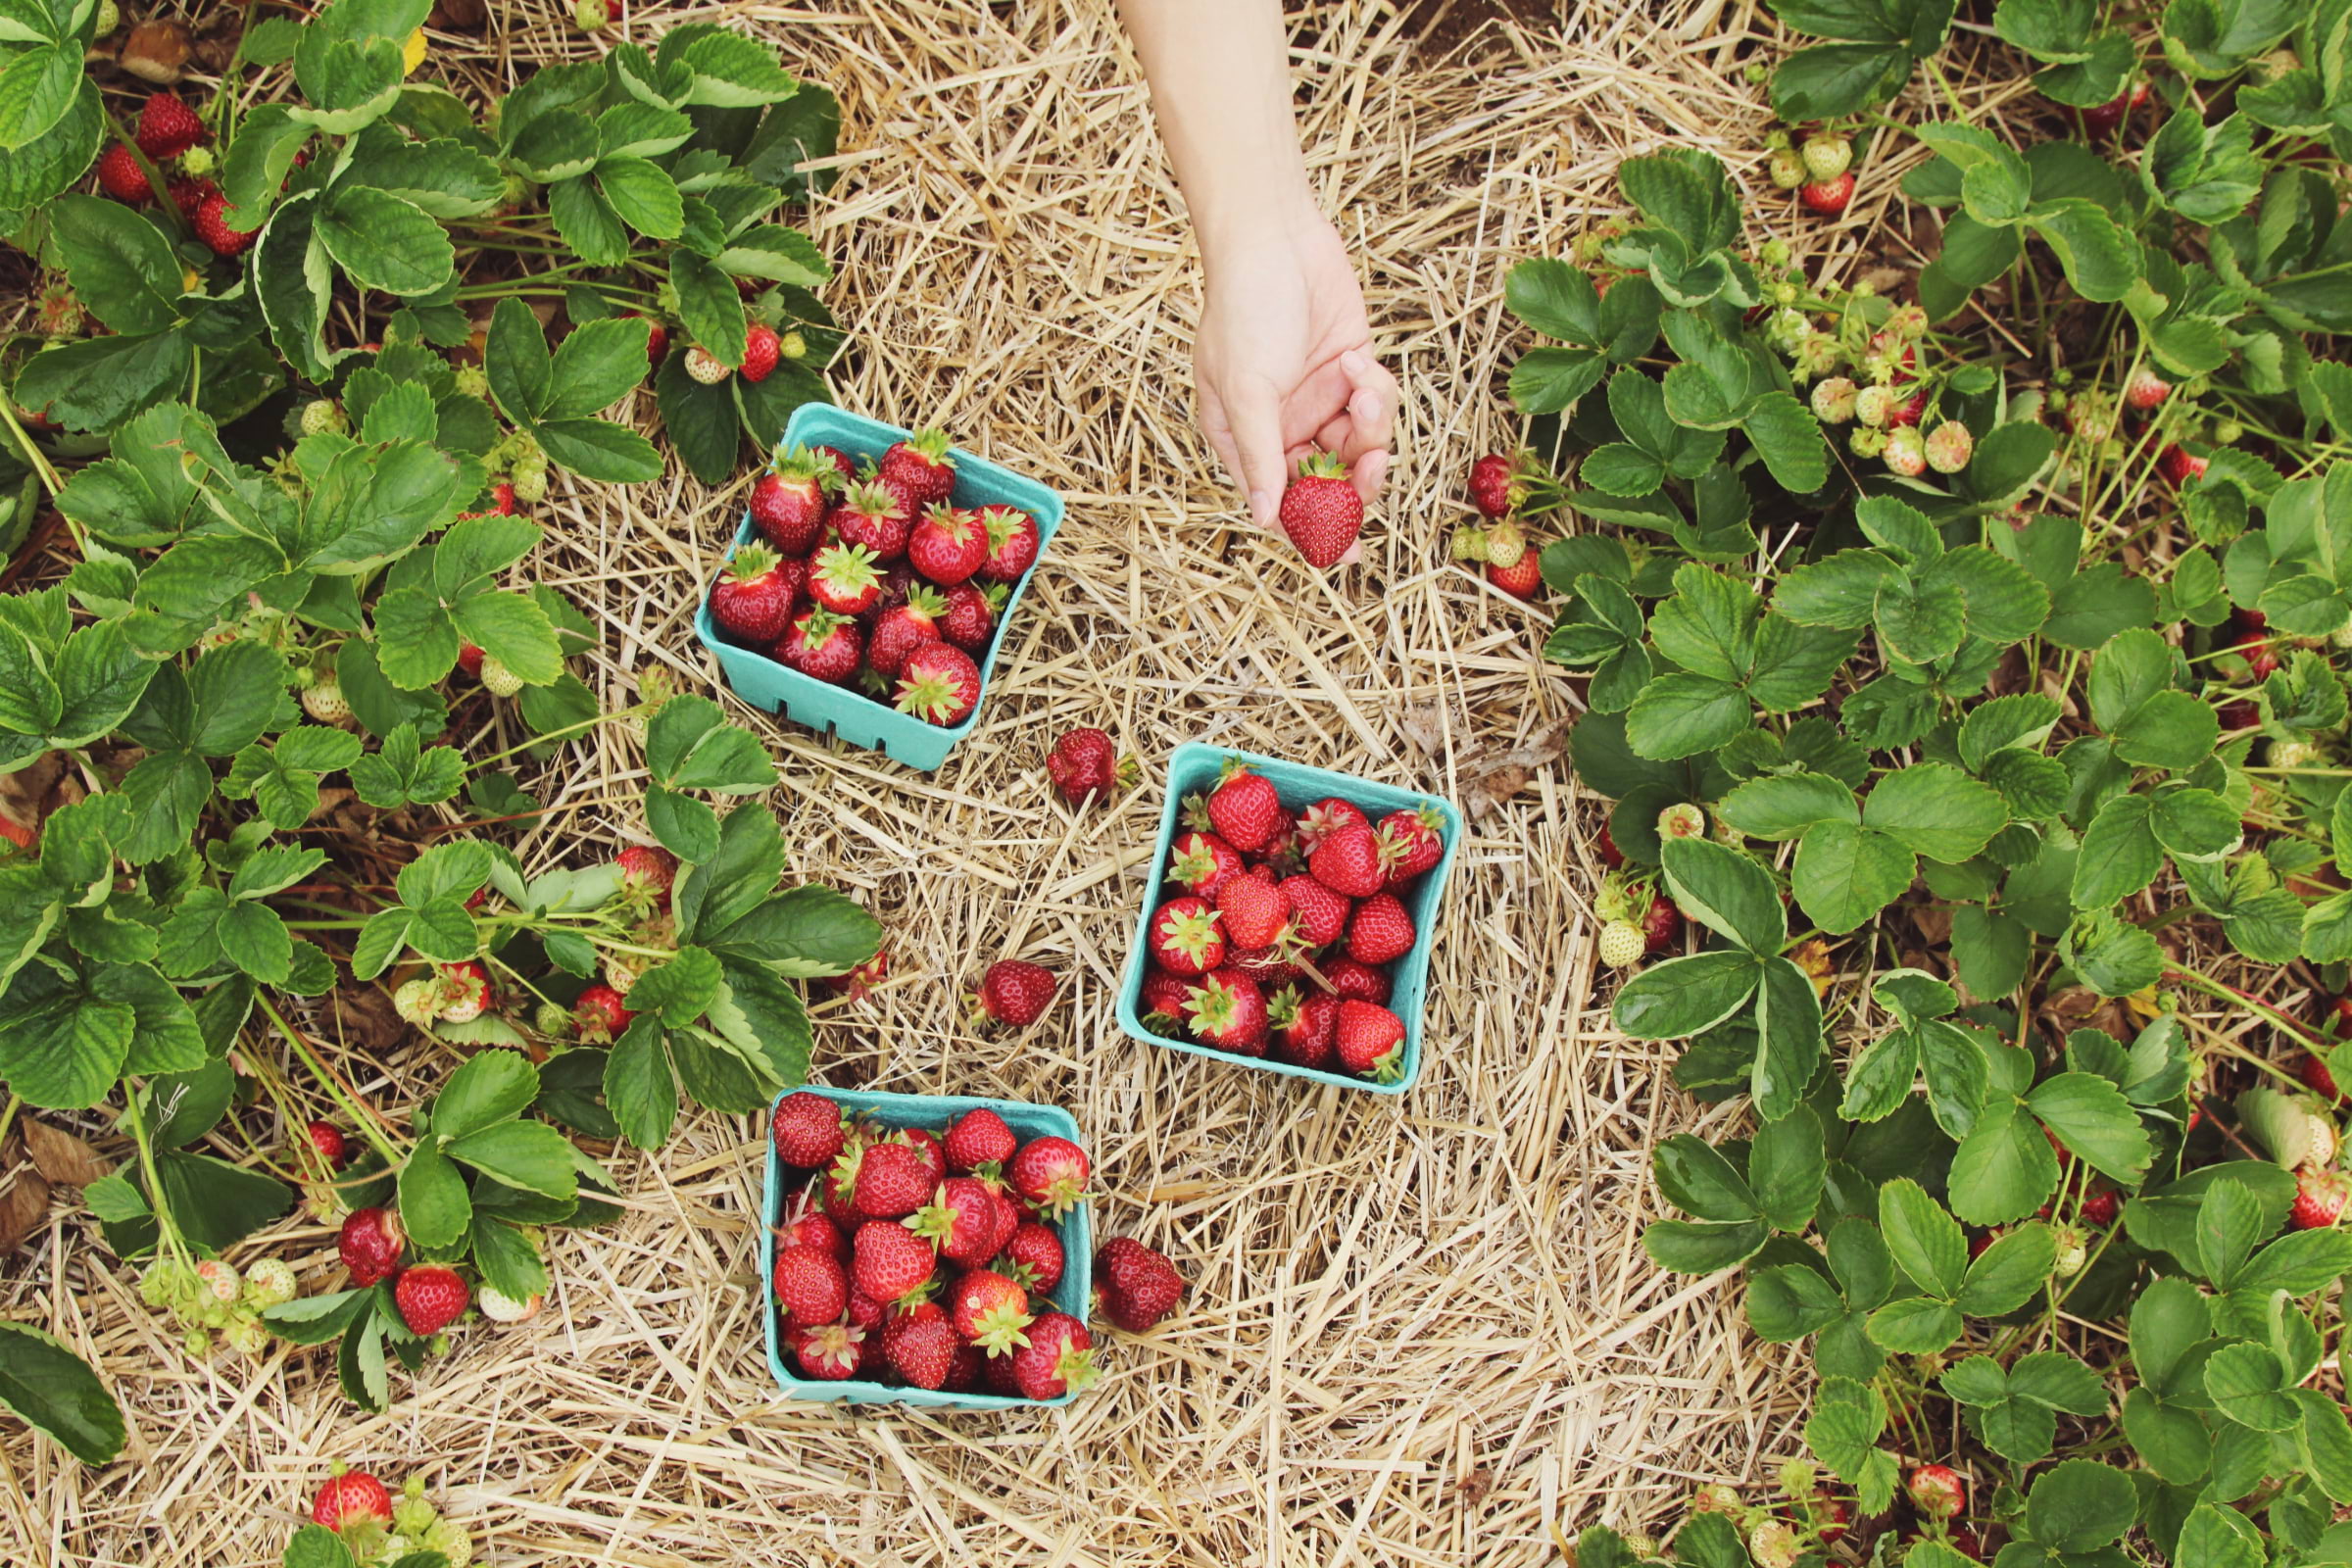 Baskets of strawberries surrounded by strawberry plants